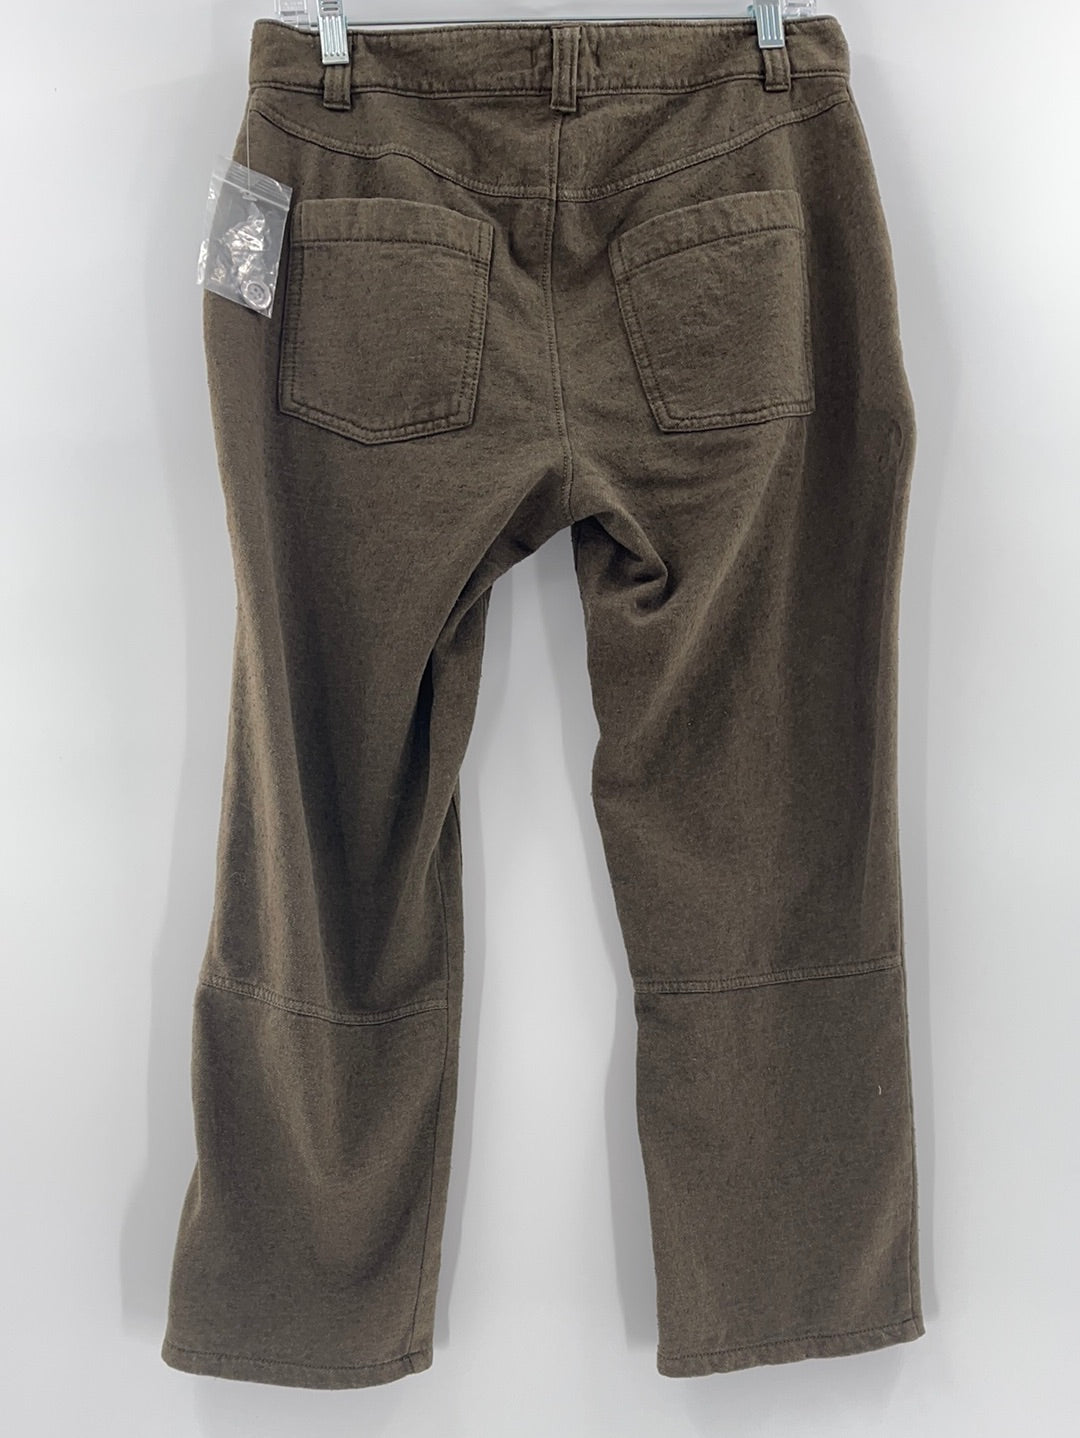 BDG Urban Outfitters Olive Green Cropped Button Trousers (Size 6)